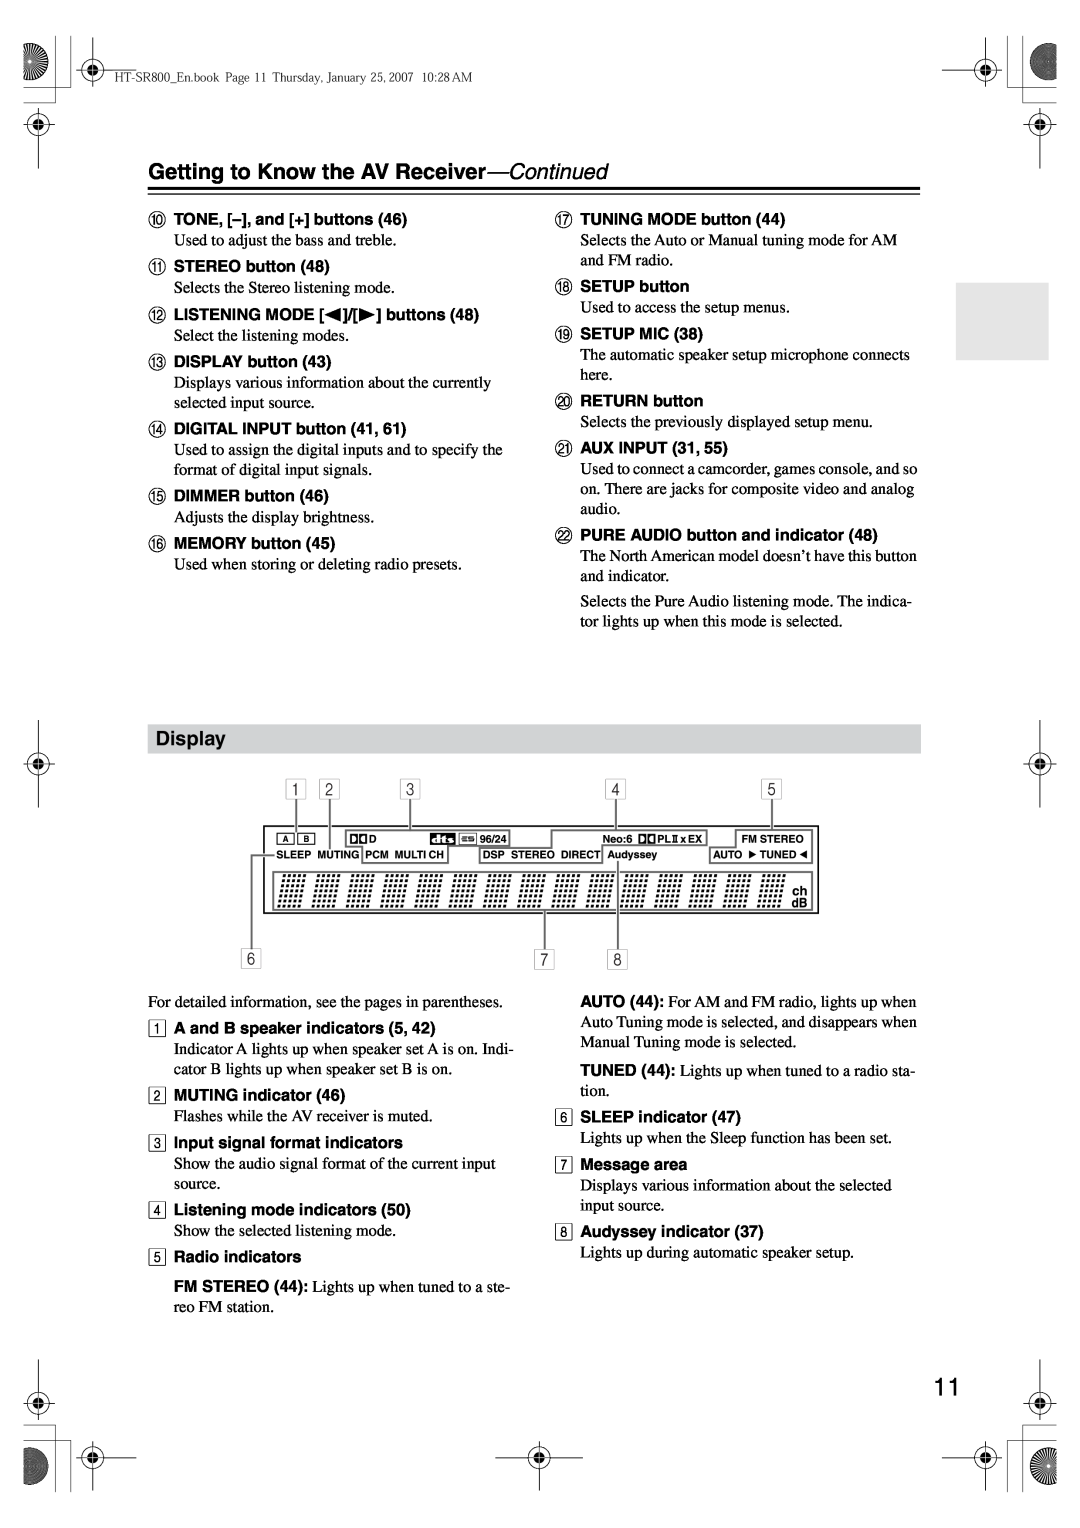 Onkyo HT-SR800 instruction manual Getting to Know the AV Receiver-Continued, Display 